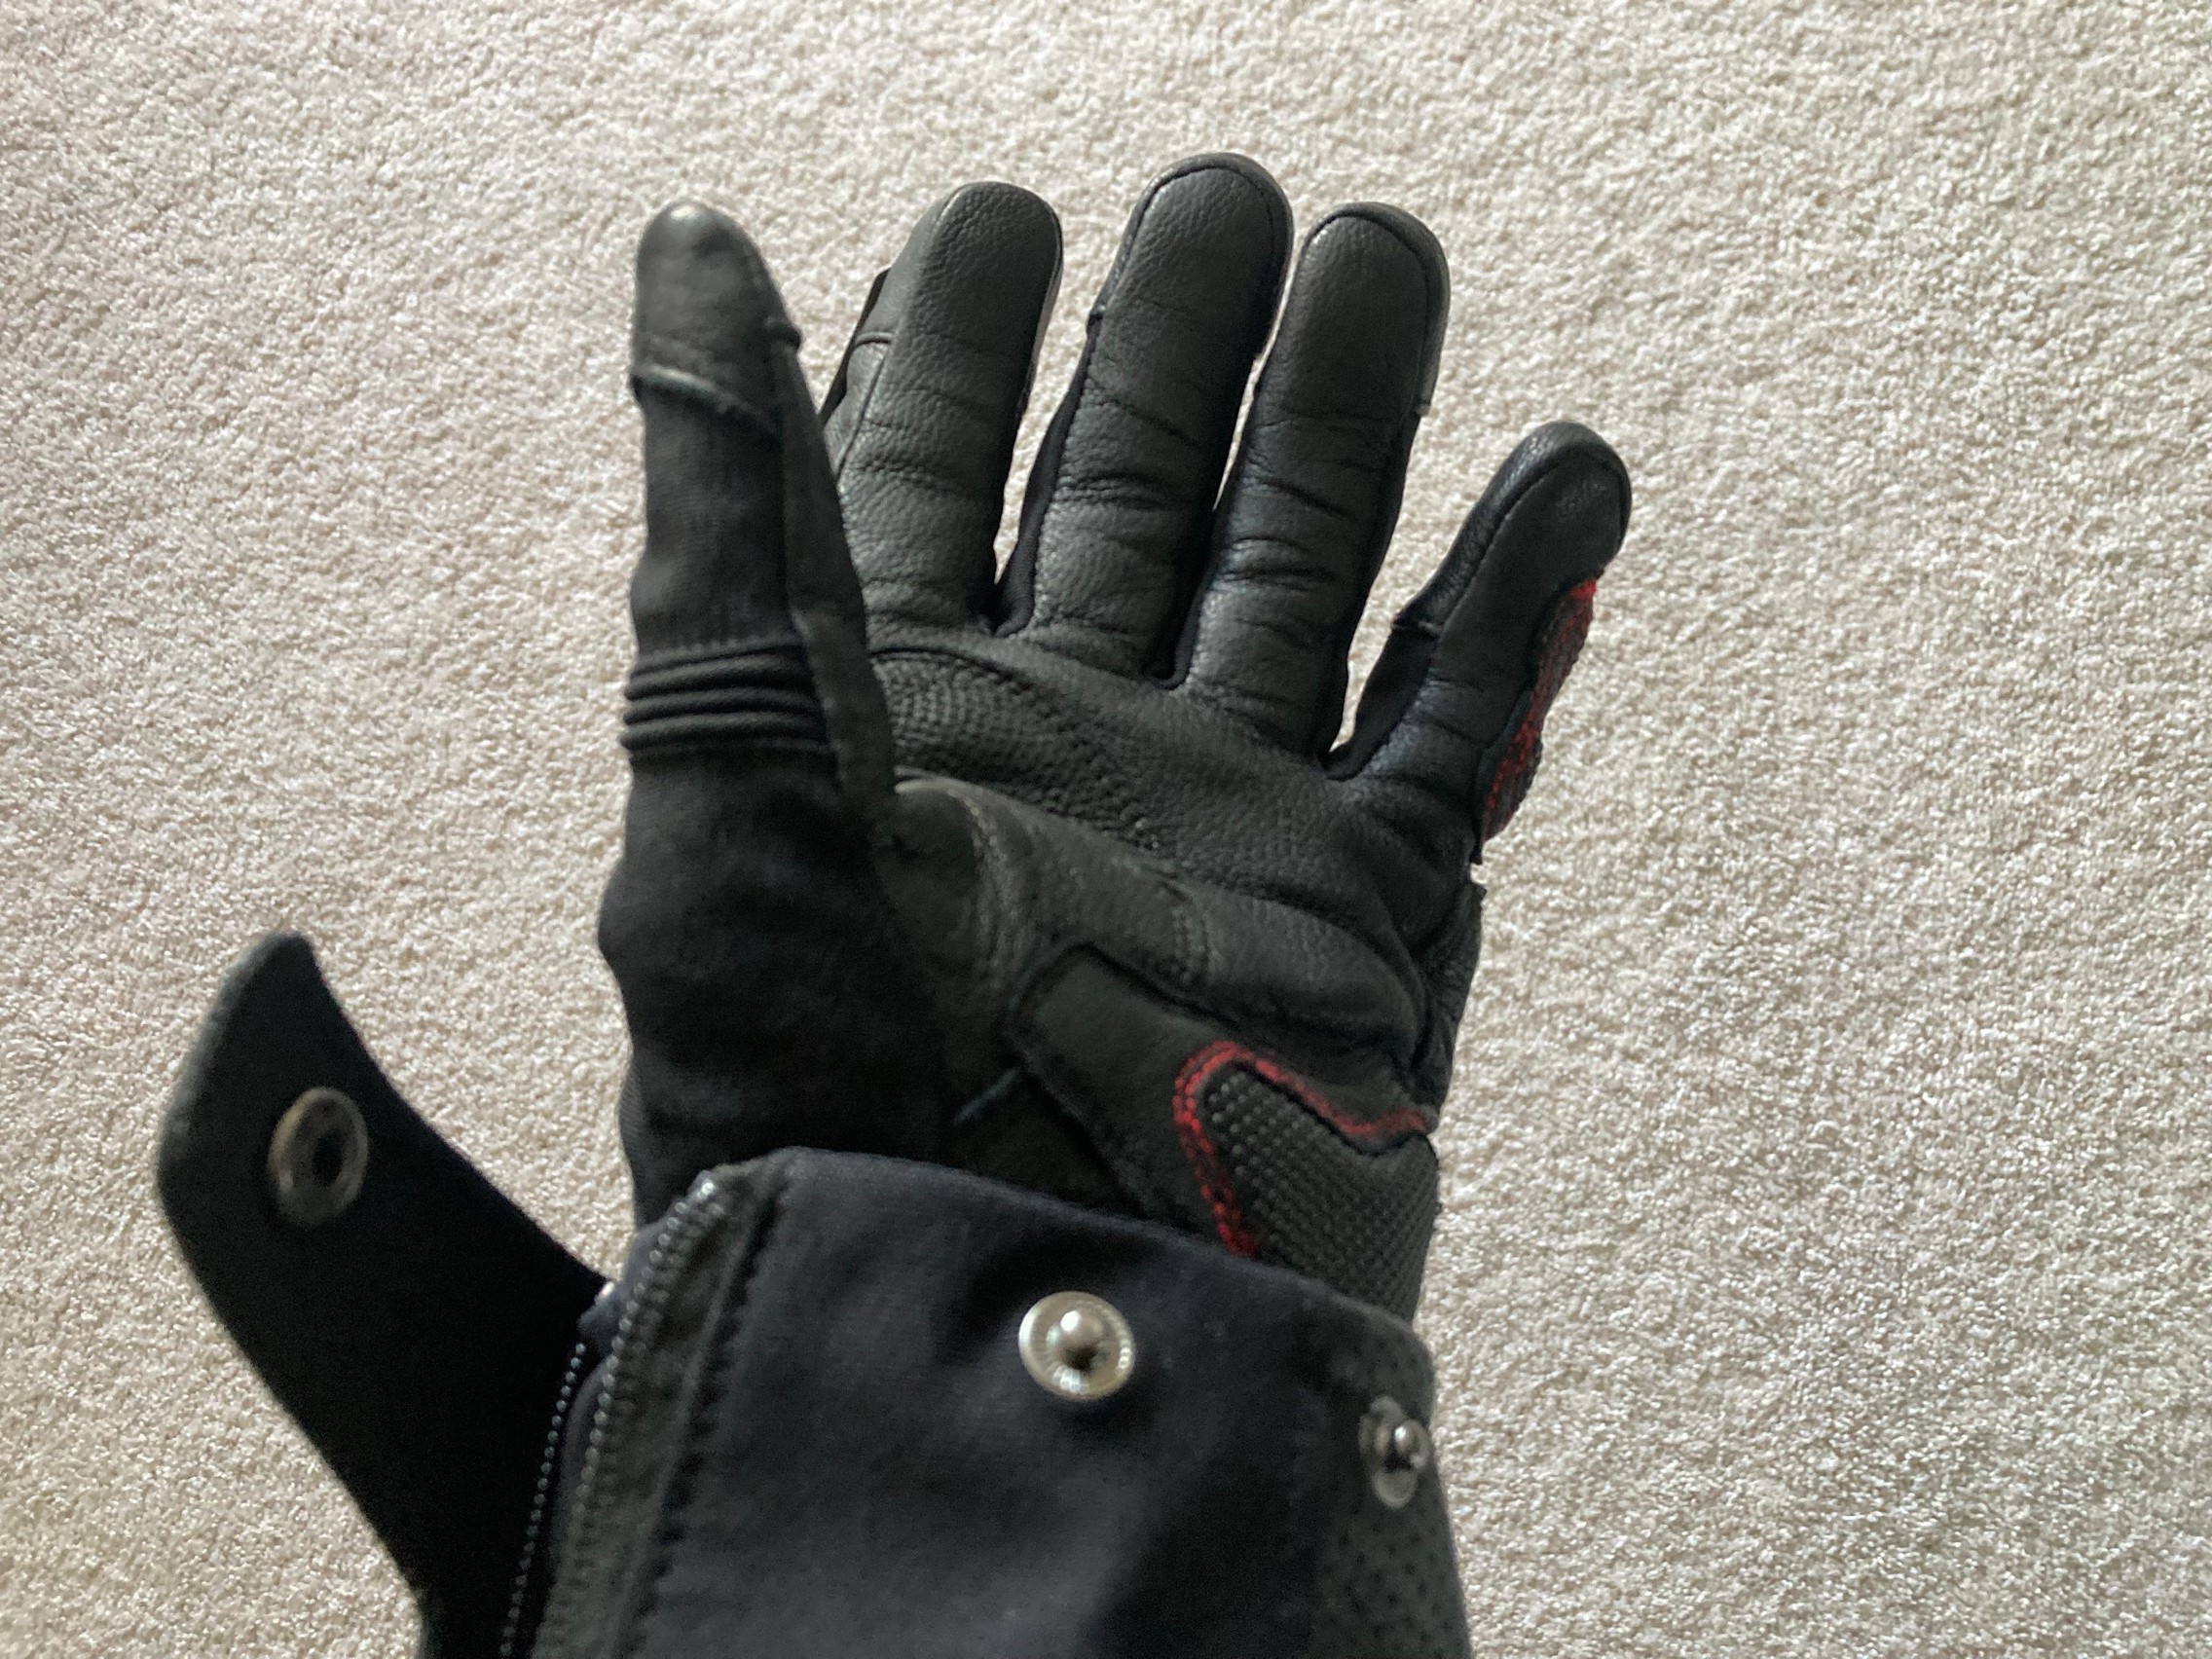 Wearing a short cuff glove with REV'IT! Valve H2O jacket